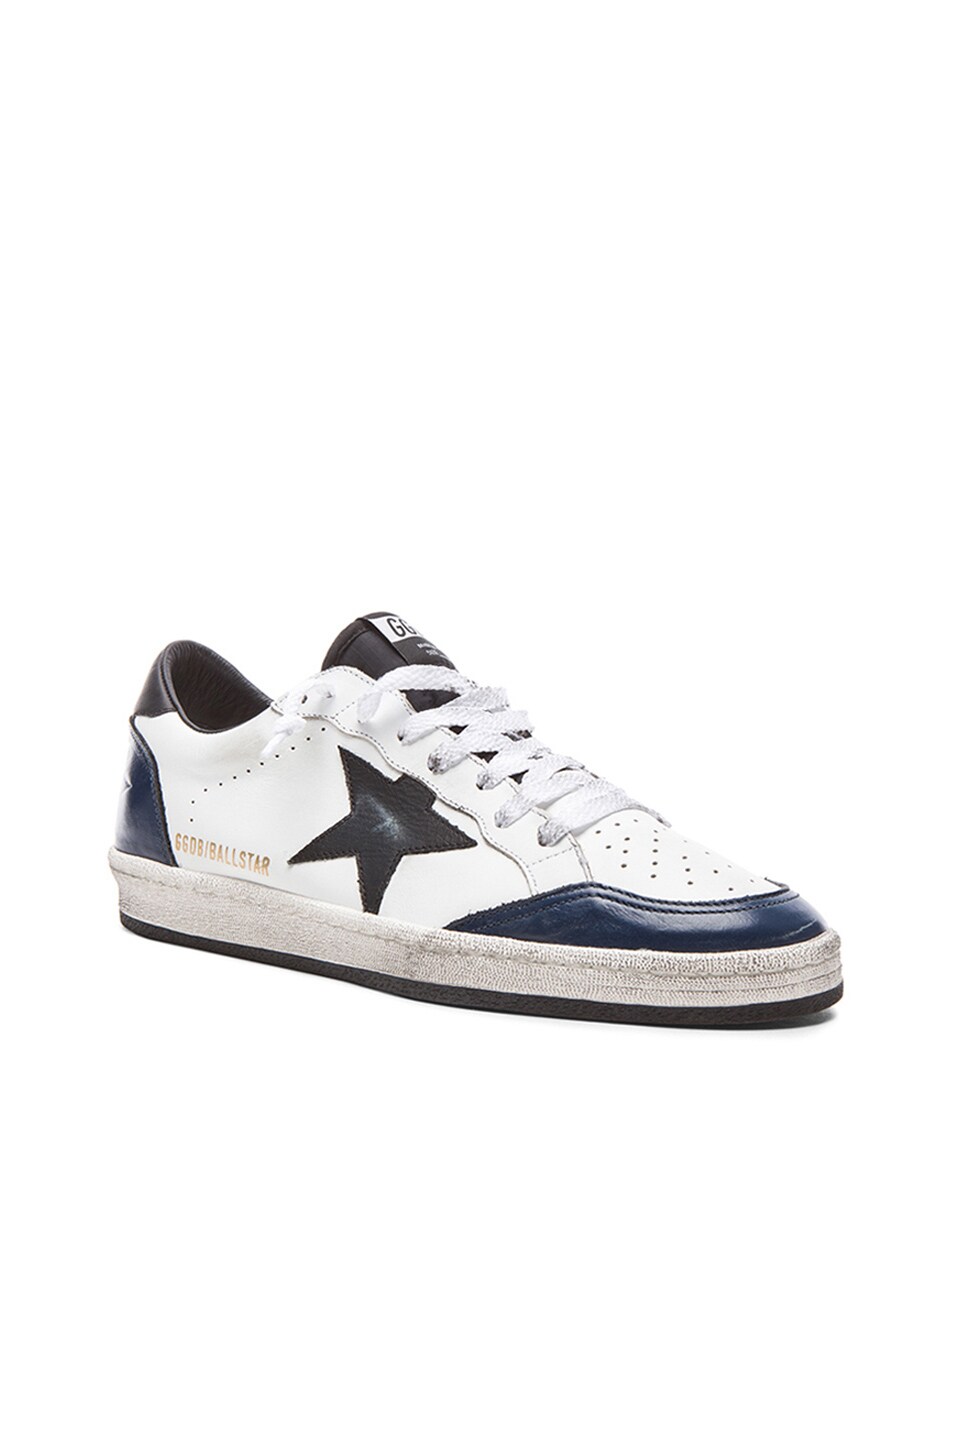 Image 1 of Golden Goose Ball Star Leather Sneakers in Black, Blue & White